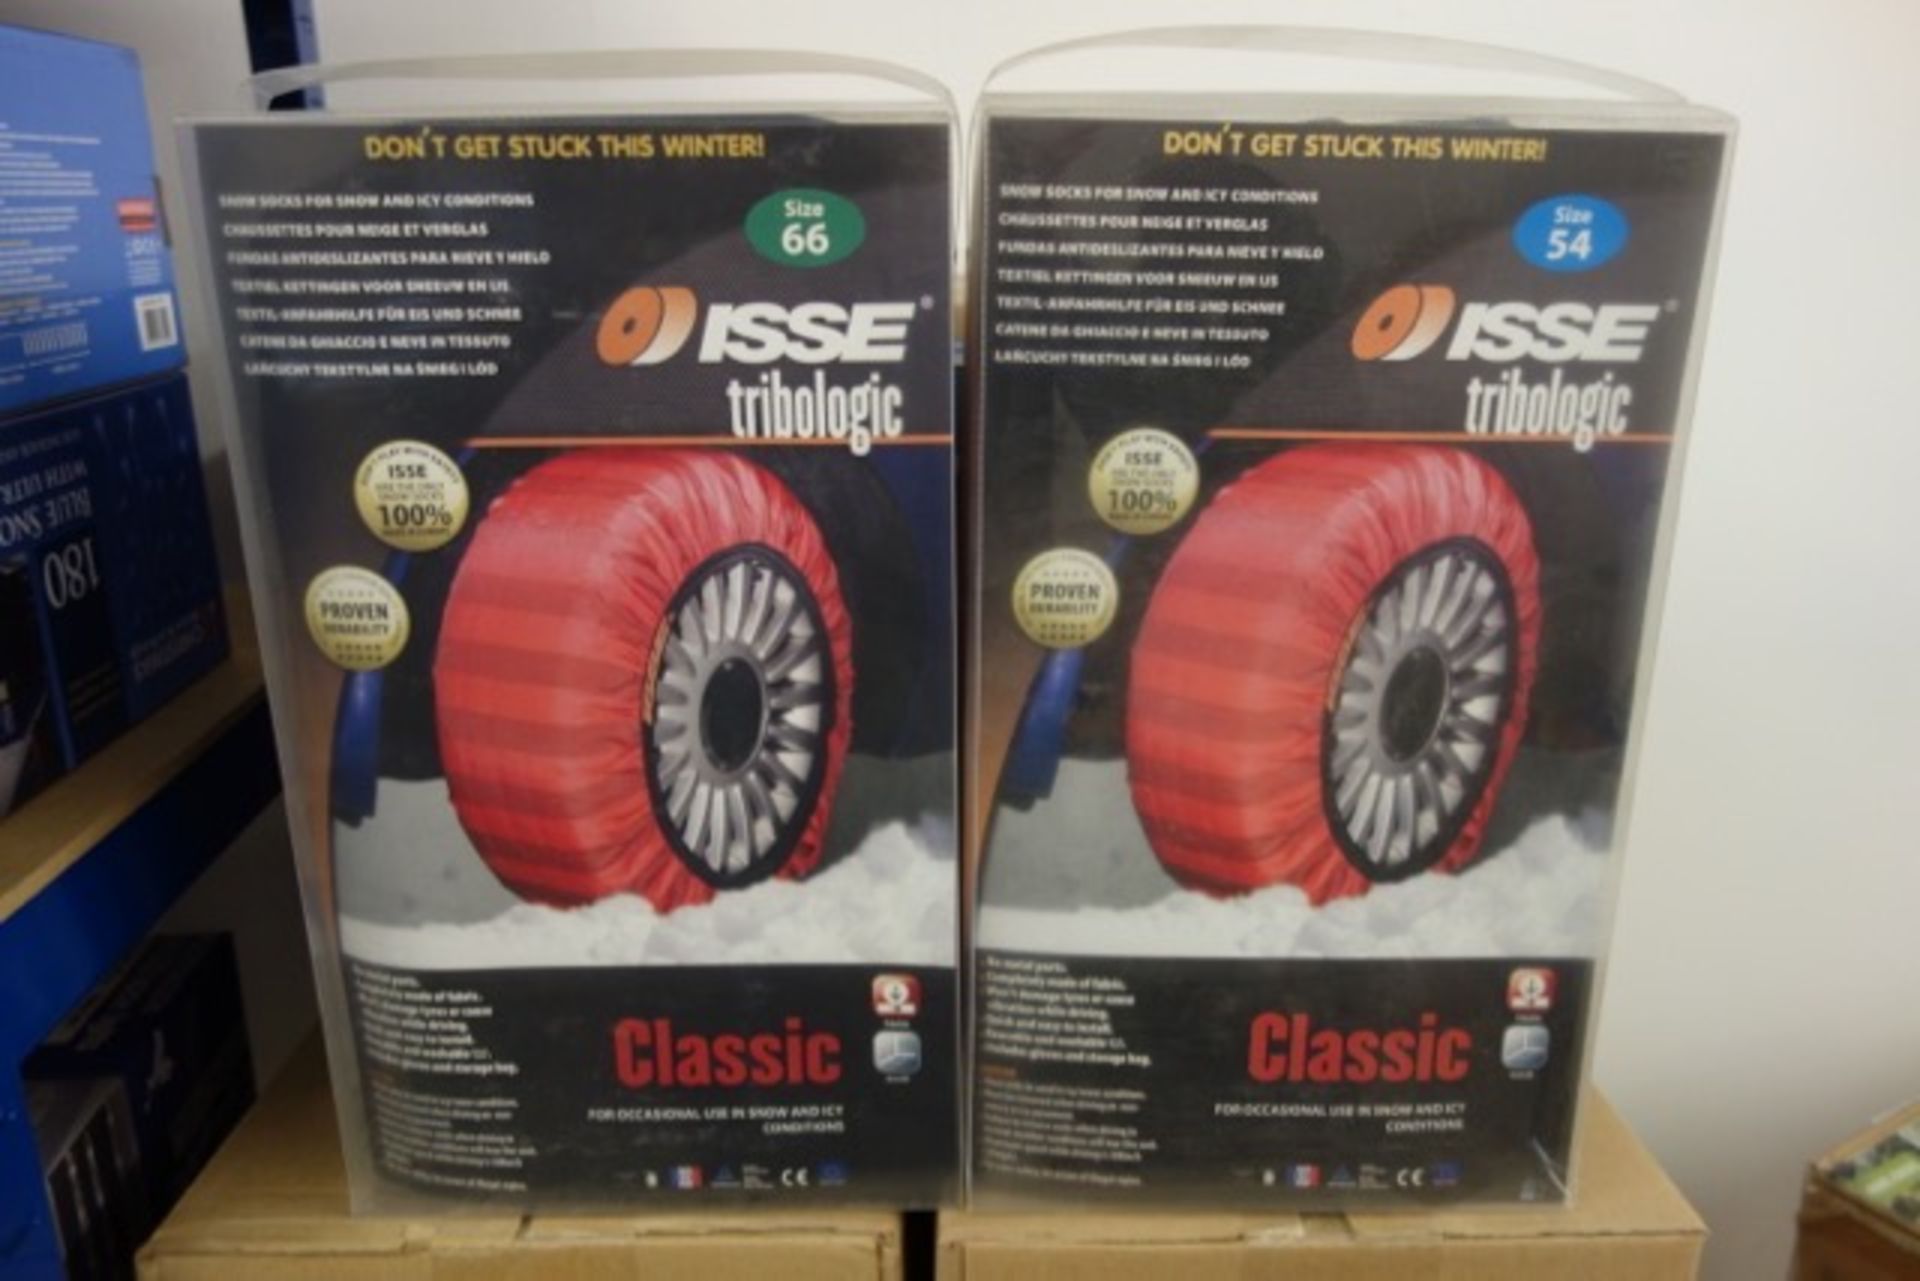 15 x Brand New Sets of Isse Tribologic Classic Snow Tyre Socks for Snow & Icy Conditions. You will